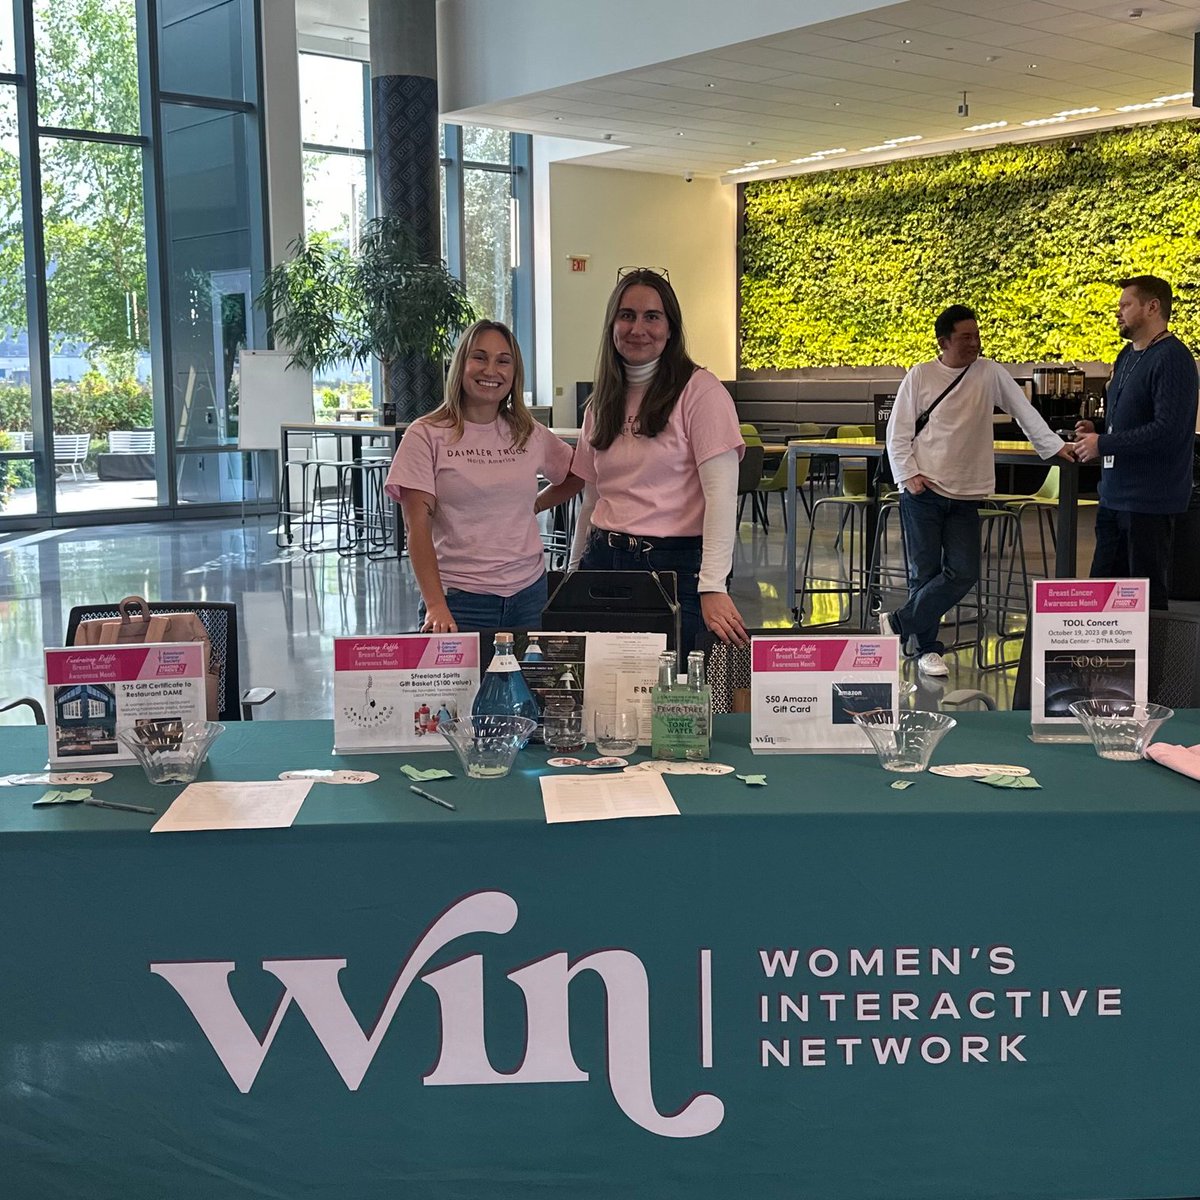 A huge thank you to our Women In Networking (WIN) group. To recognize #BreastCancerAwarenessMonth, they've created Pink Out WINSdays, organized teams for Making Strides charity walks, and arranged for office visits by the Mammogram Bus. We appreciate you!